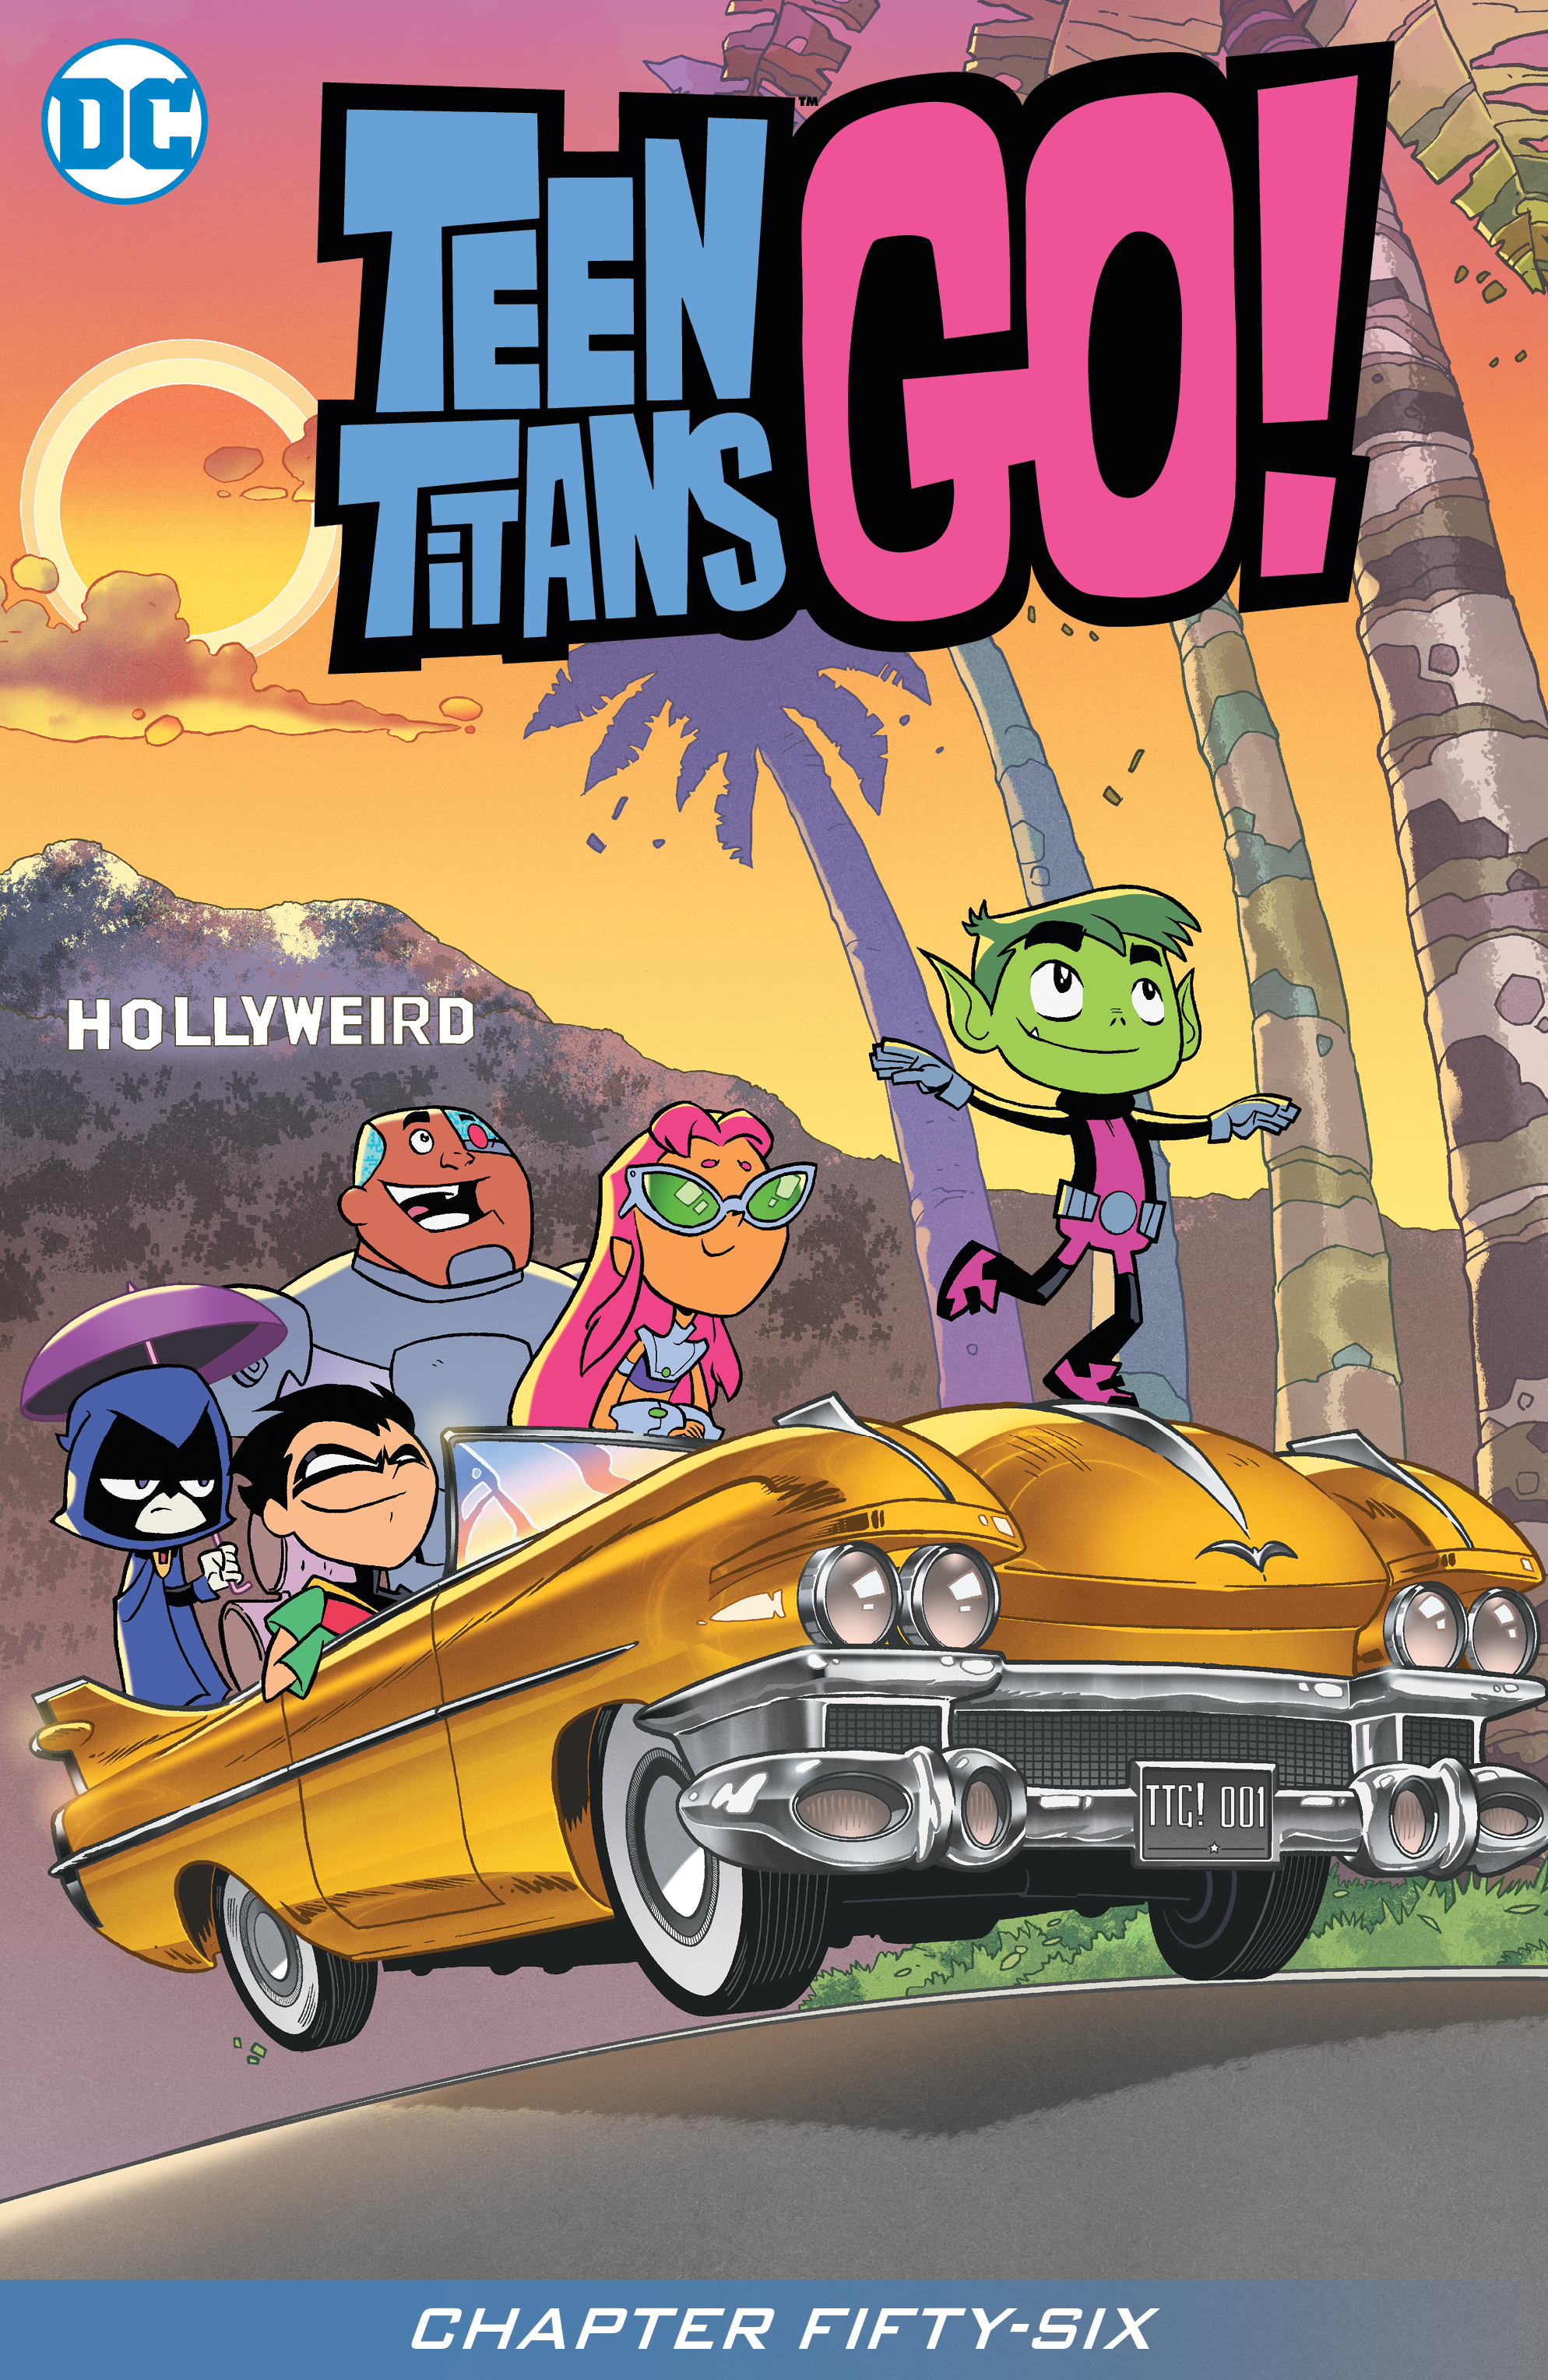 Teen Titans Go! (2013-) #56 preview images